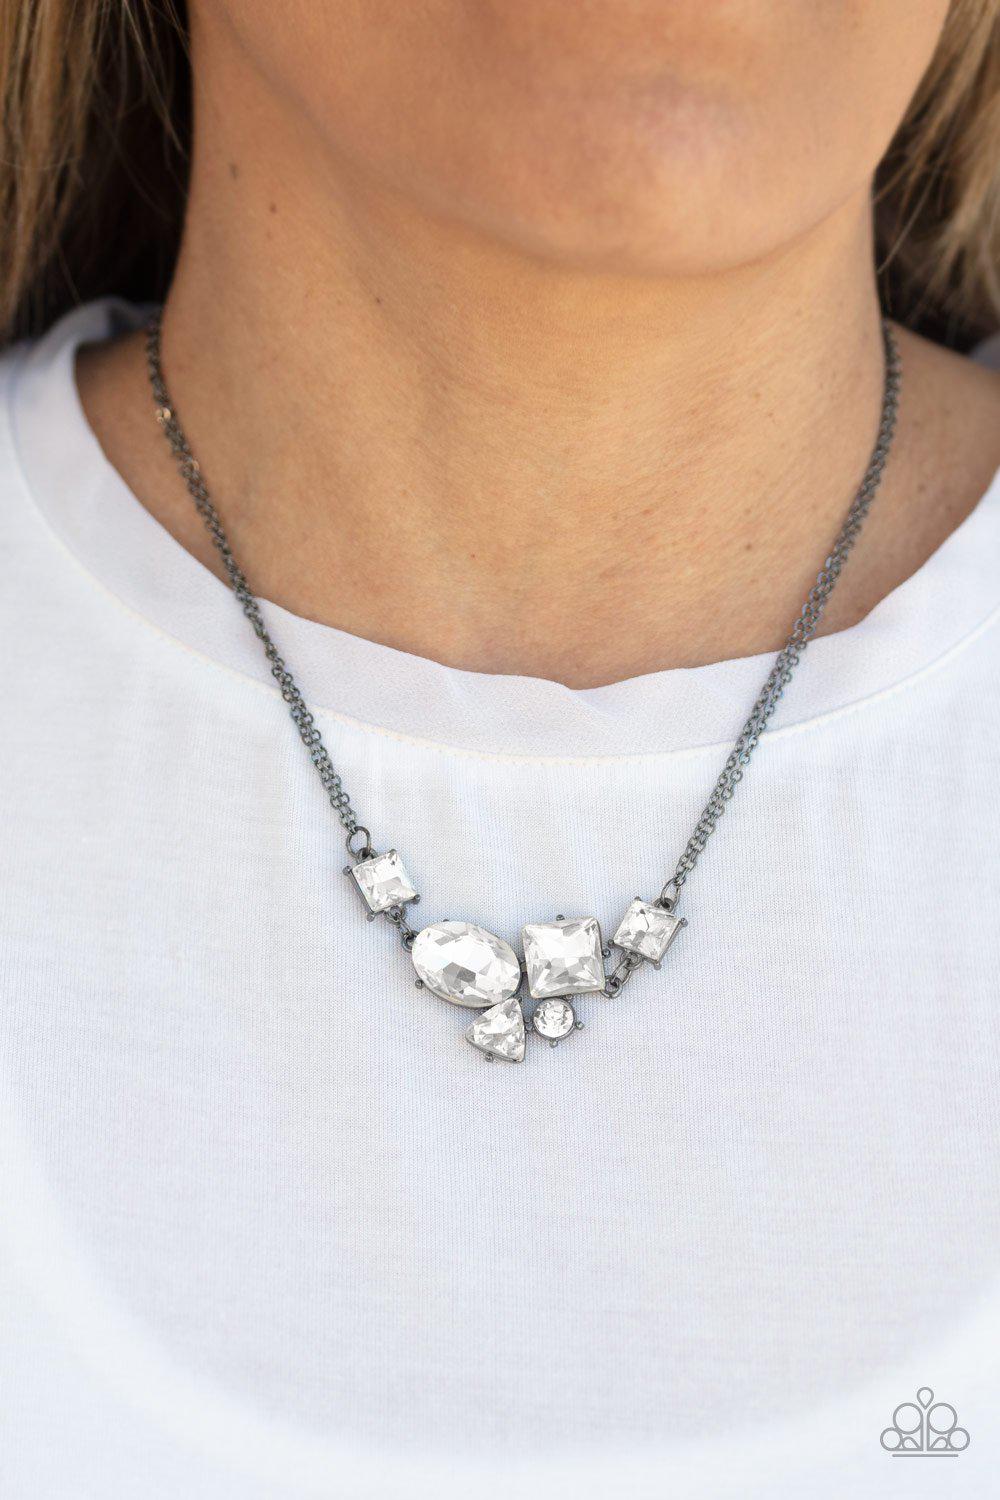 Constellation Collection Gunmetal Black and White Rhinestone Necklace - Paparazzi Accessories-CarasShop.com - $5 Jewelry by Cara Jewels